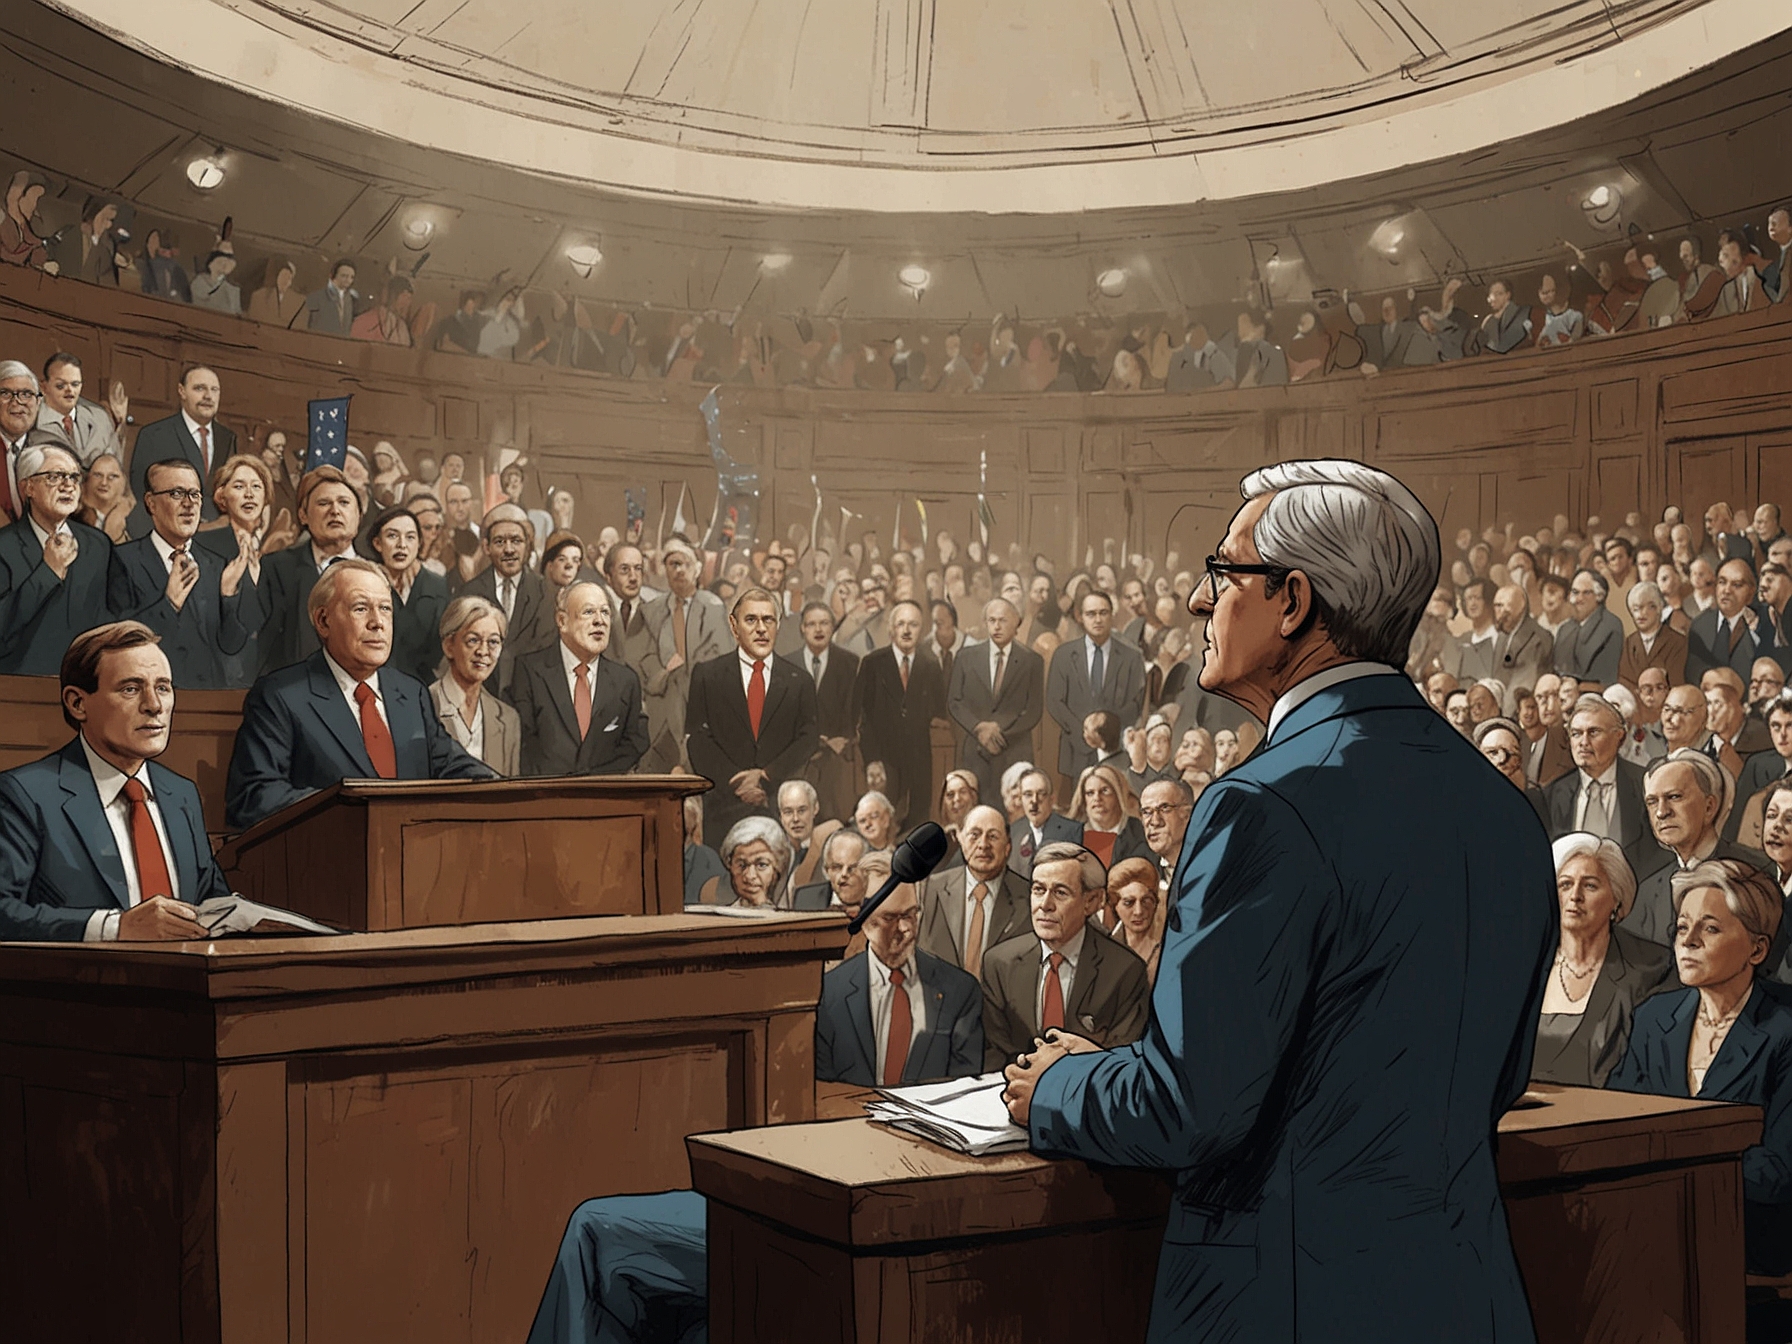 An illustration of a confident, principled political leader addressing a diverse audience, emphasizing the importance of transparency and integrity in handling foreign interference.